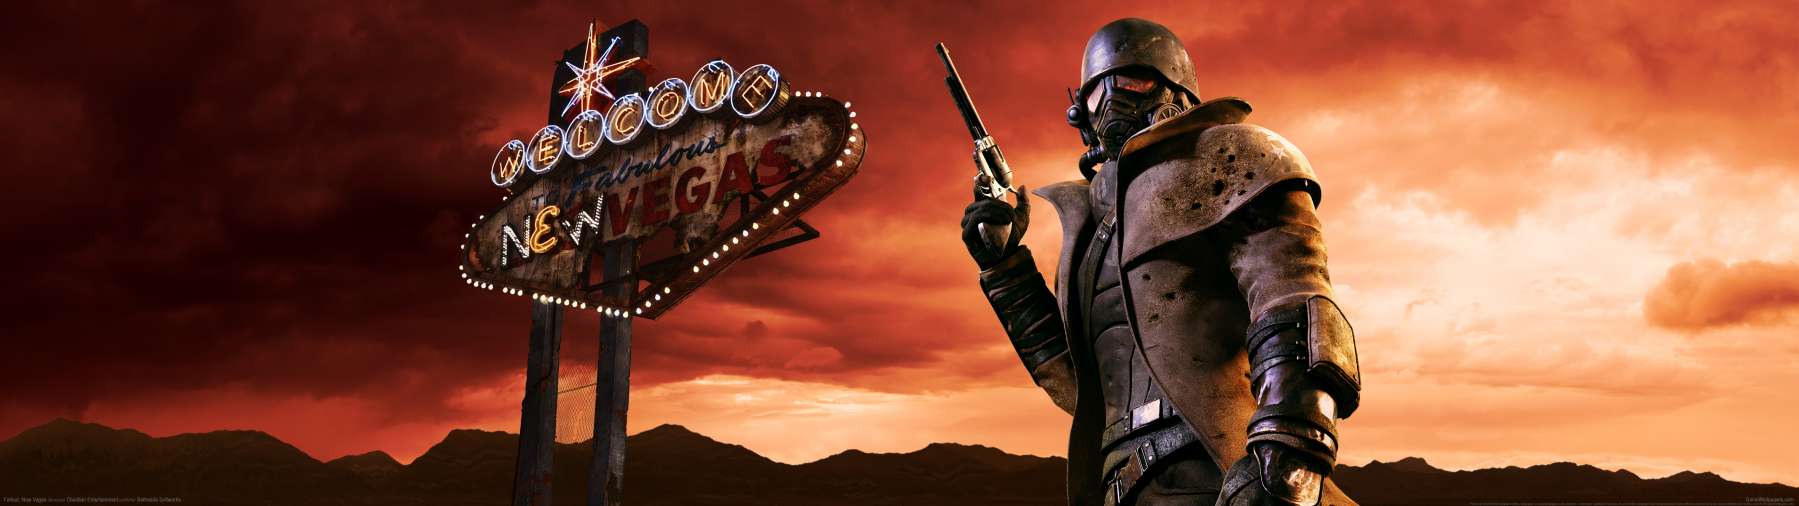 Fallout: New Vegas superwide wallpaper or background 01